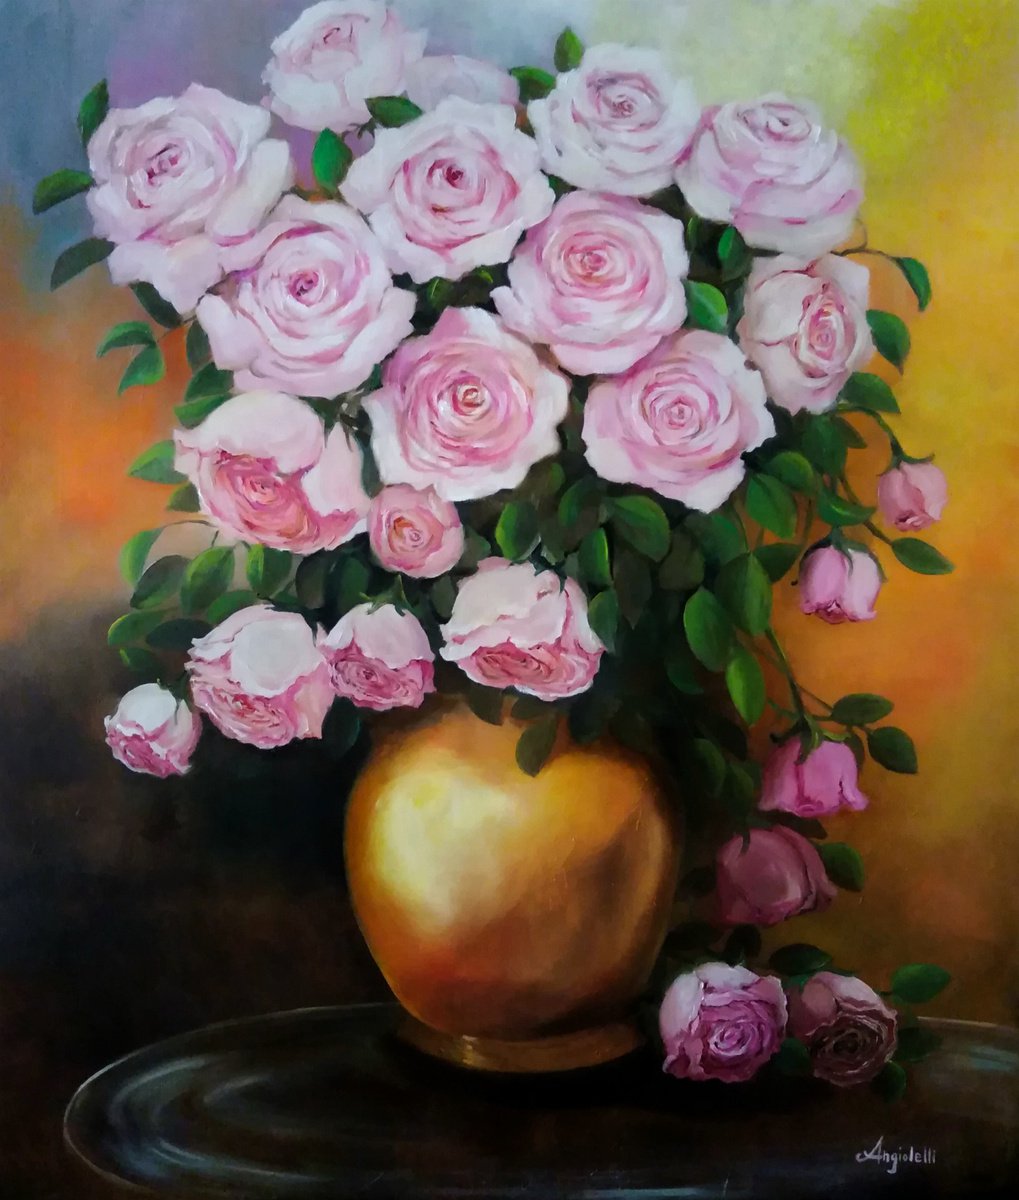 Vase with roses - flowers - still life - gift- by Anna Rita Angiolelli